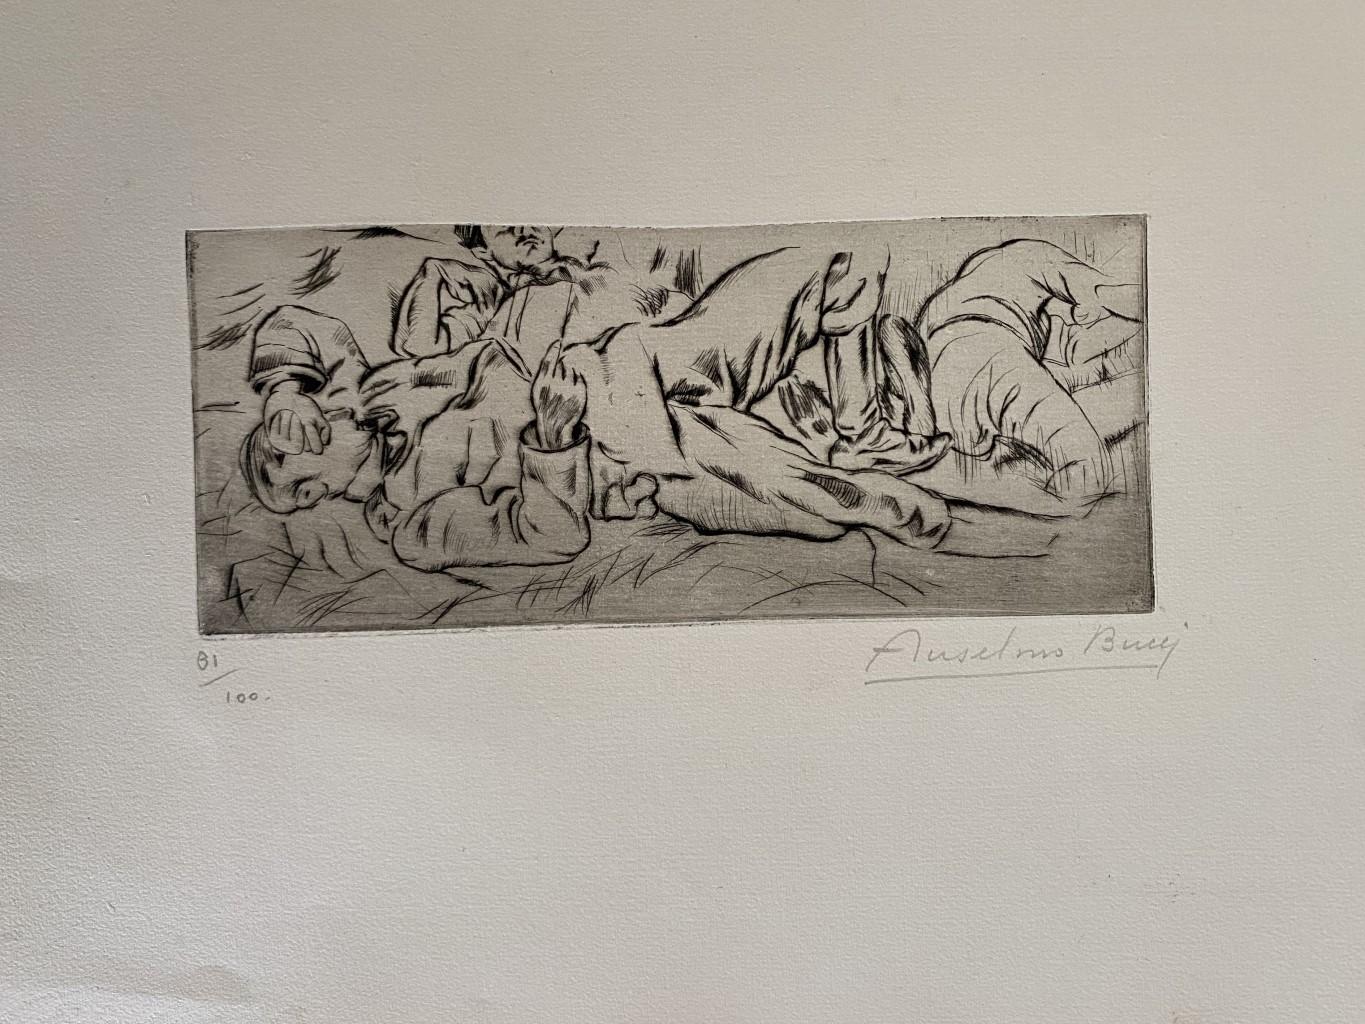 "Military" 1917s is a beautiful print in etching technique, realized by Anselmo Bucci (1887-1955).

Hand signed. Numbered 81/100 of prints on the lower left. On the lower left corner, an illegible iscription written in pencil.

Image Dimensions: 9 x